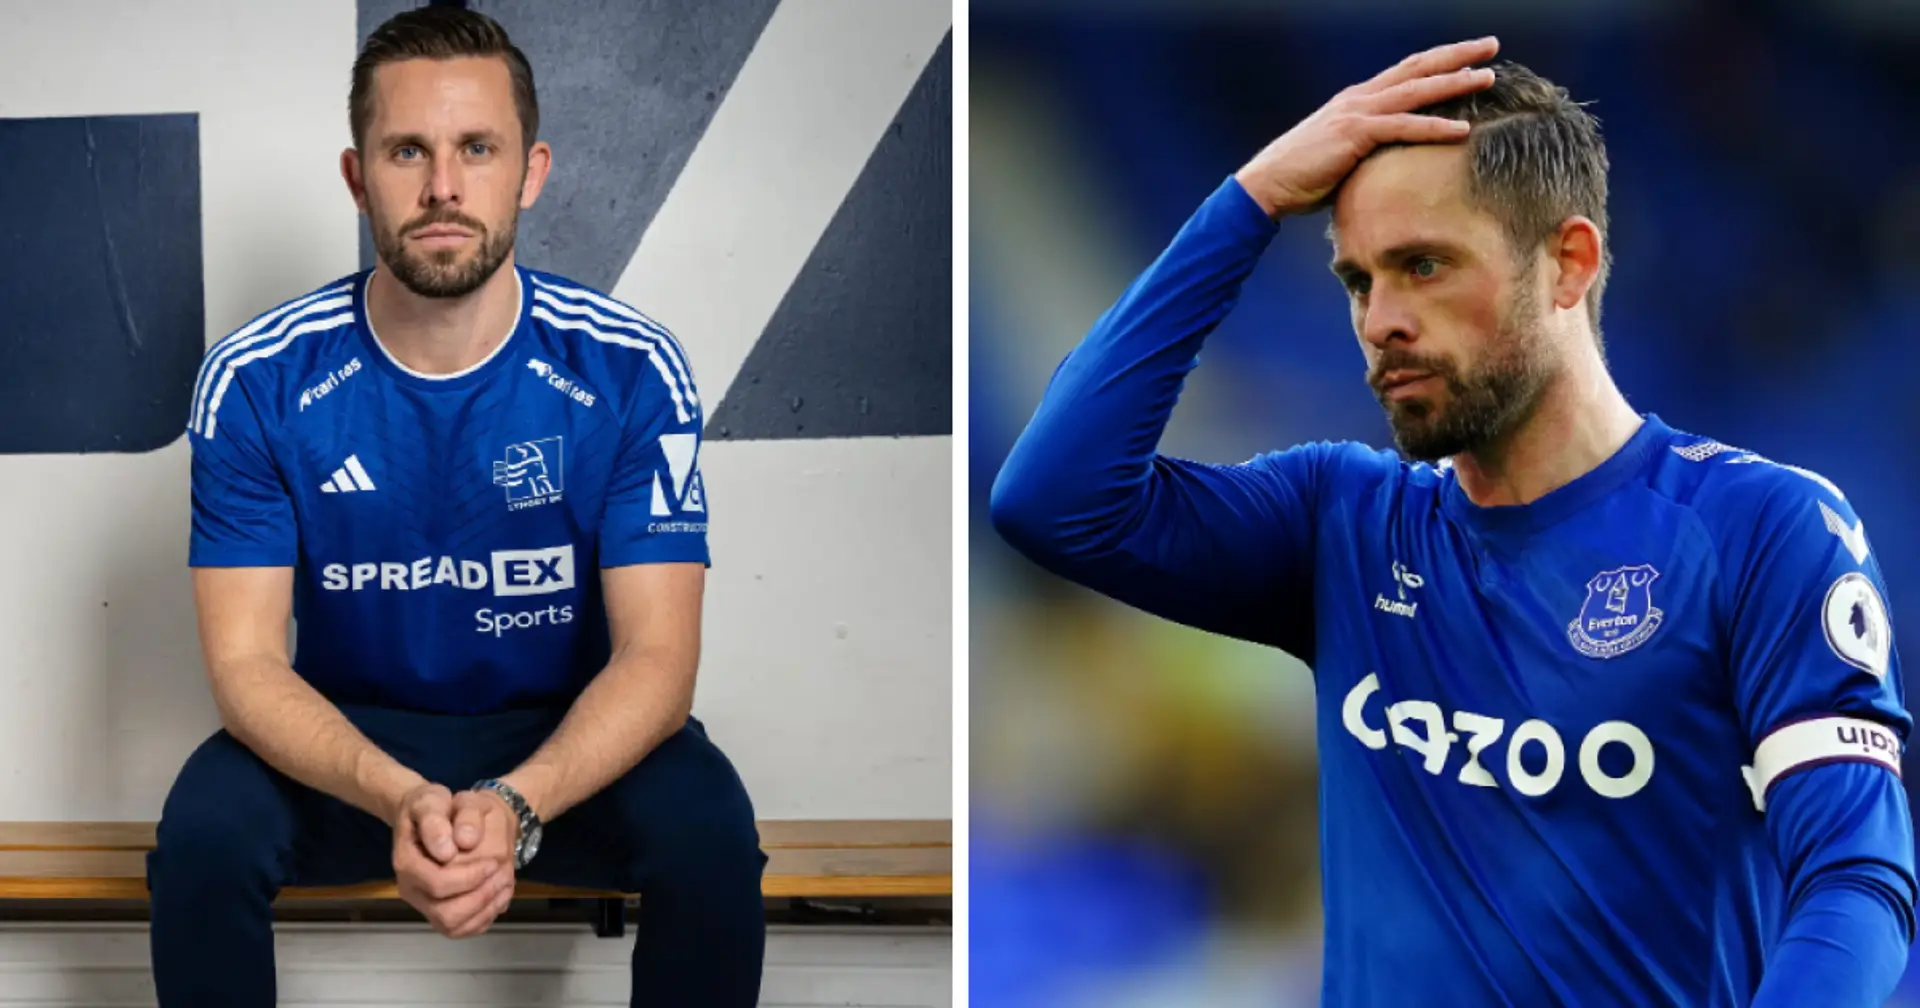 Gylfi Sigurdsson opens up about his move to new club after Everton's departure